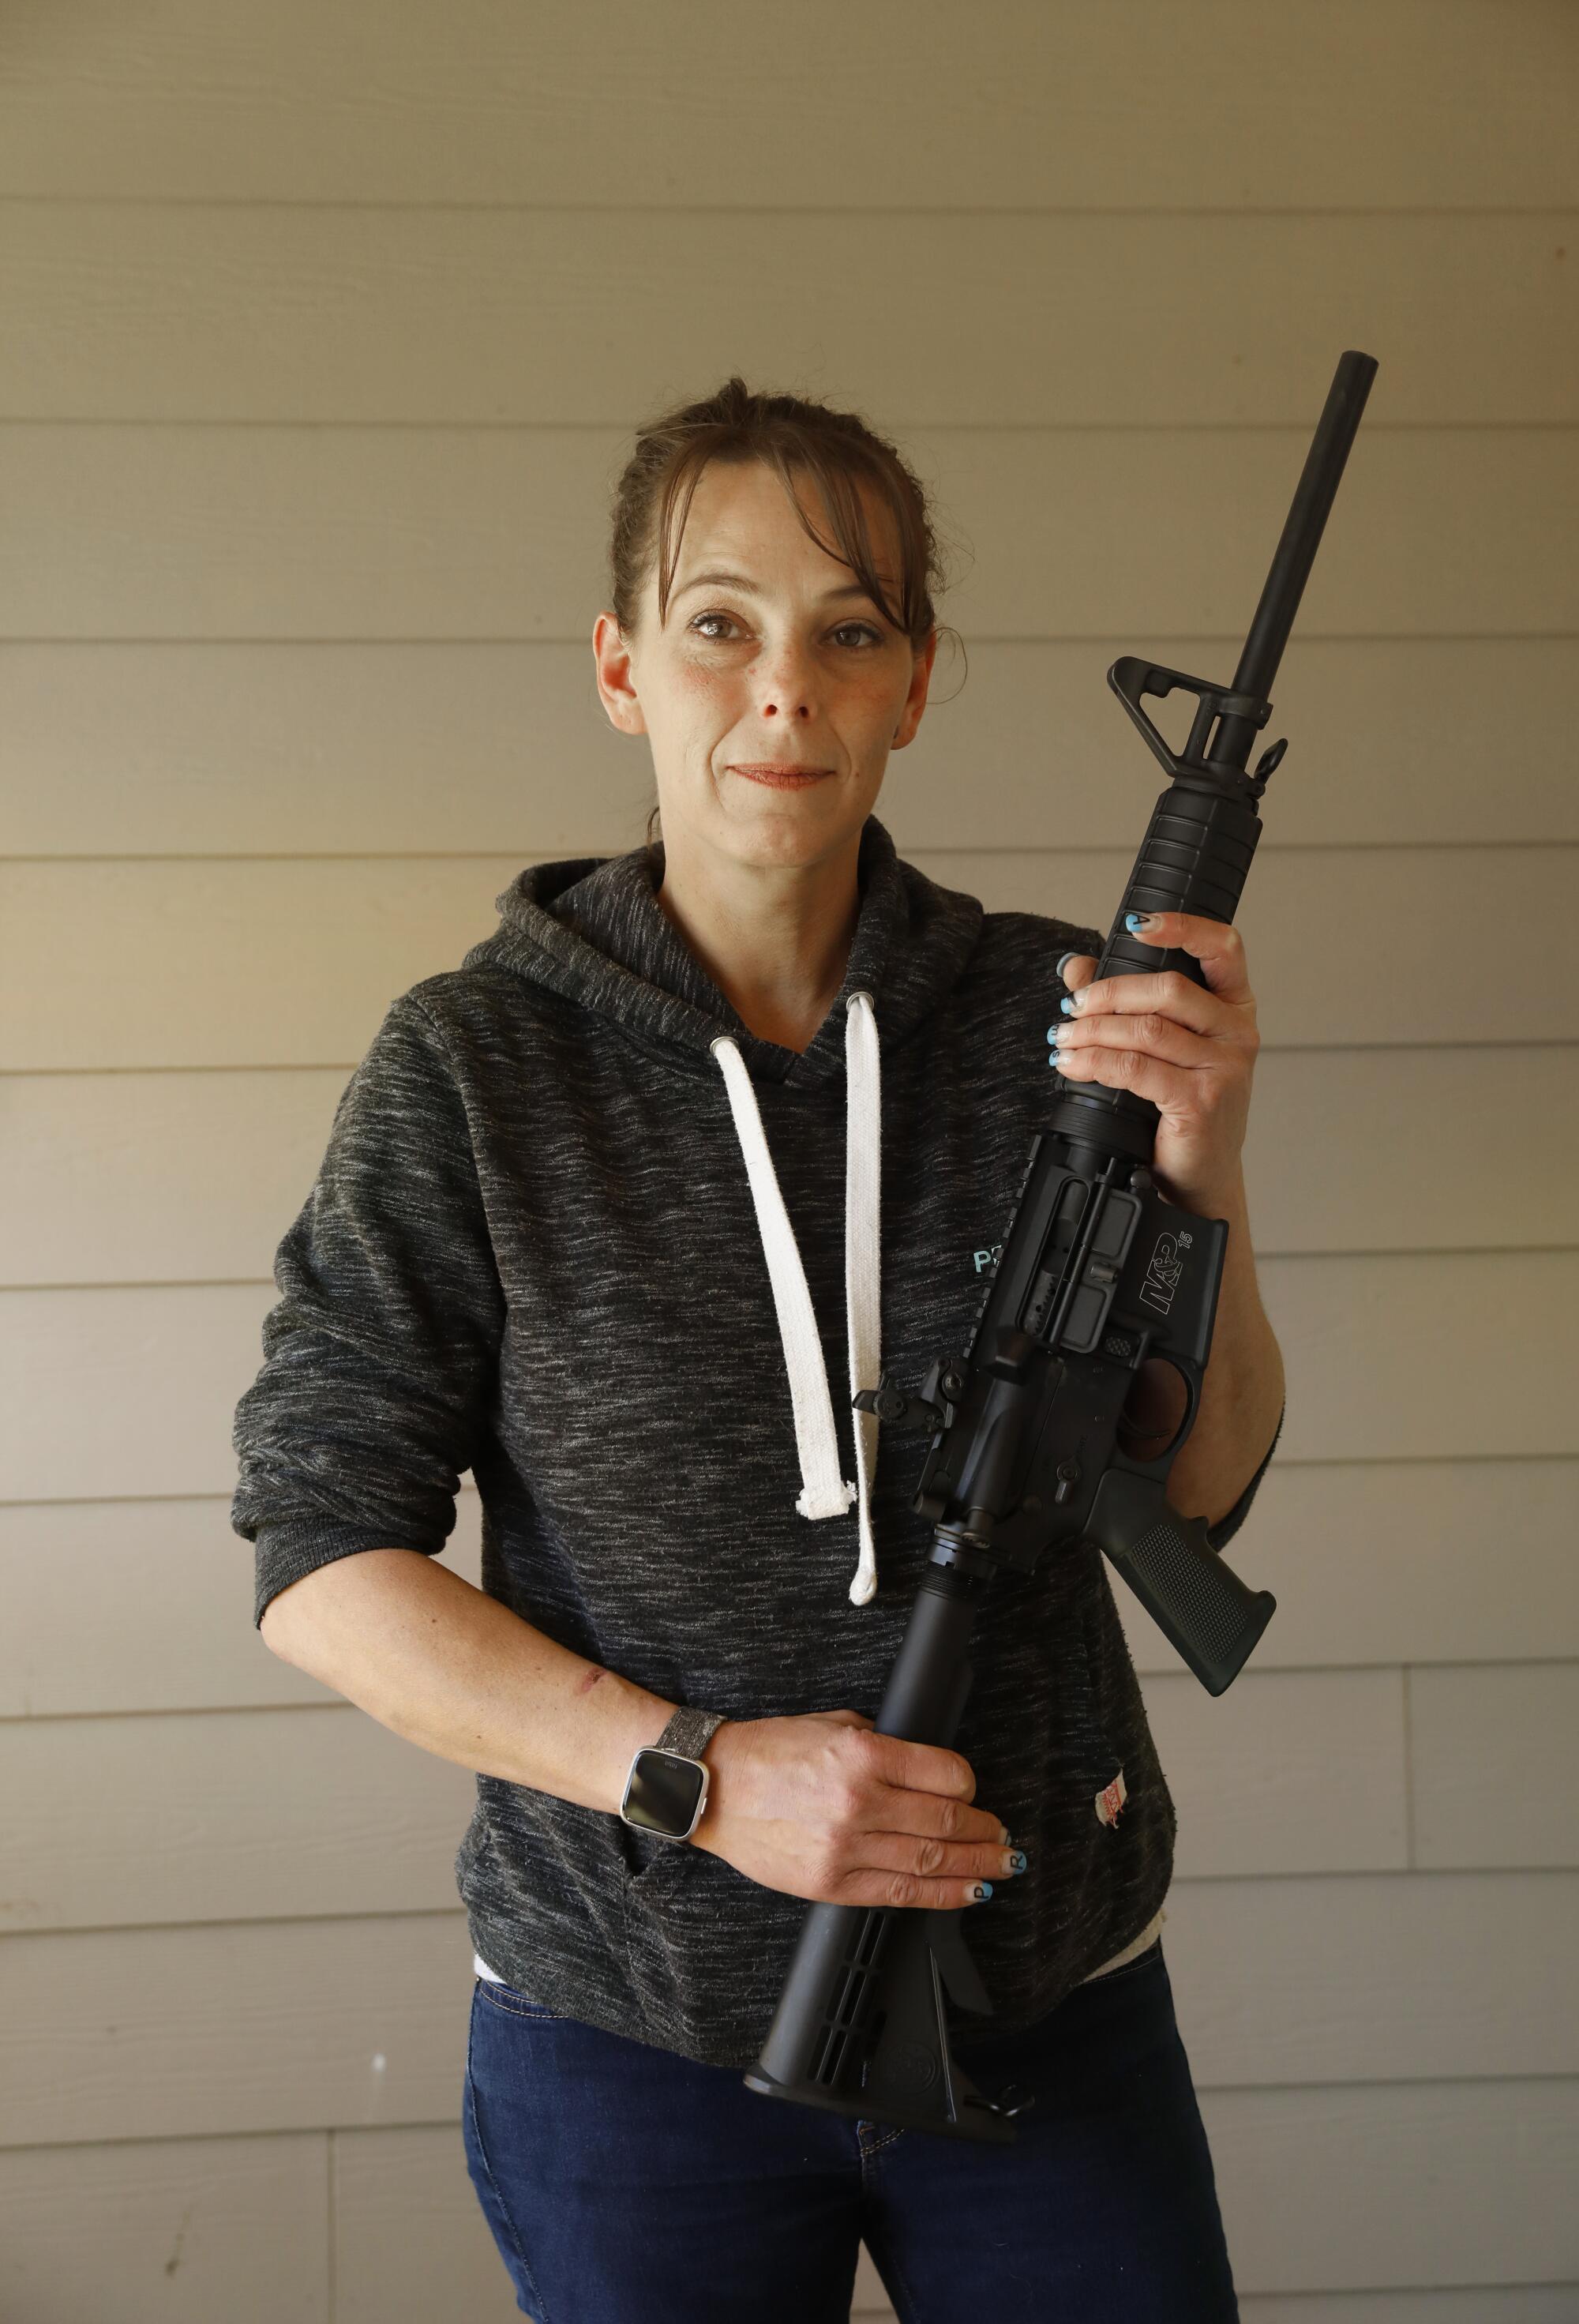 Leslee Cates hopes to get her license to sell guns in Crescent City, Calif.